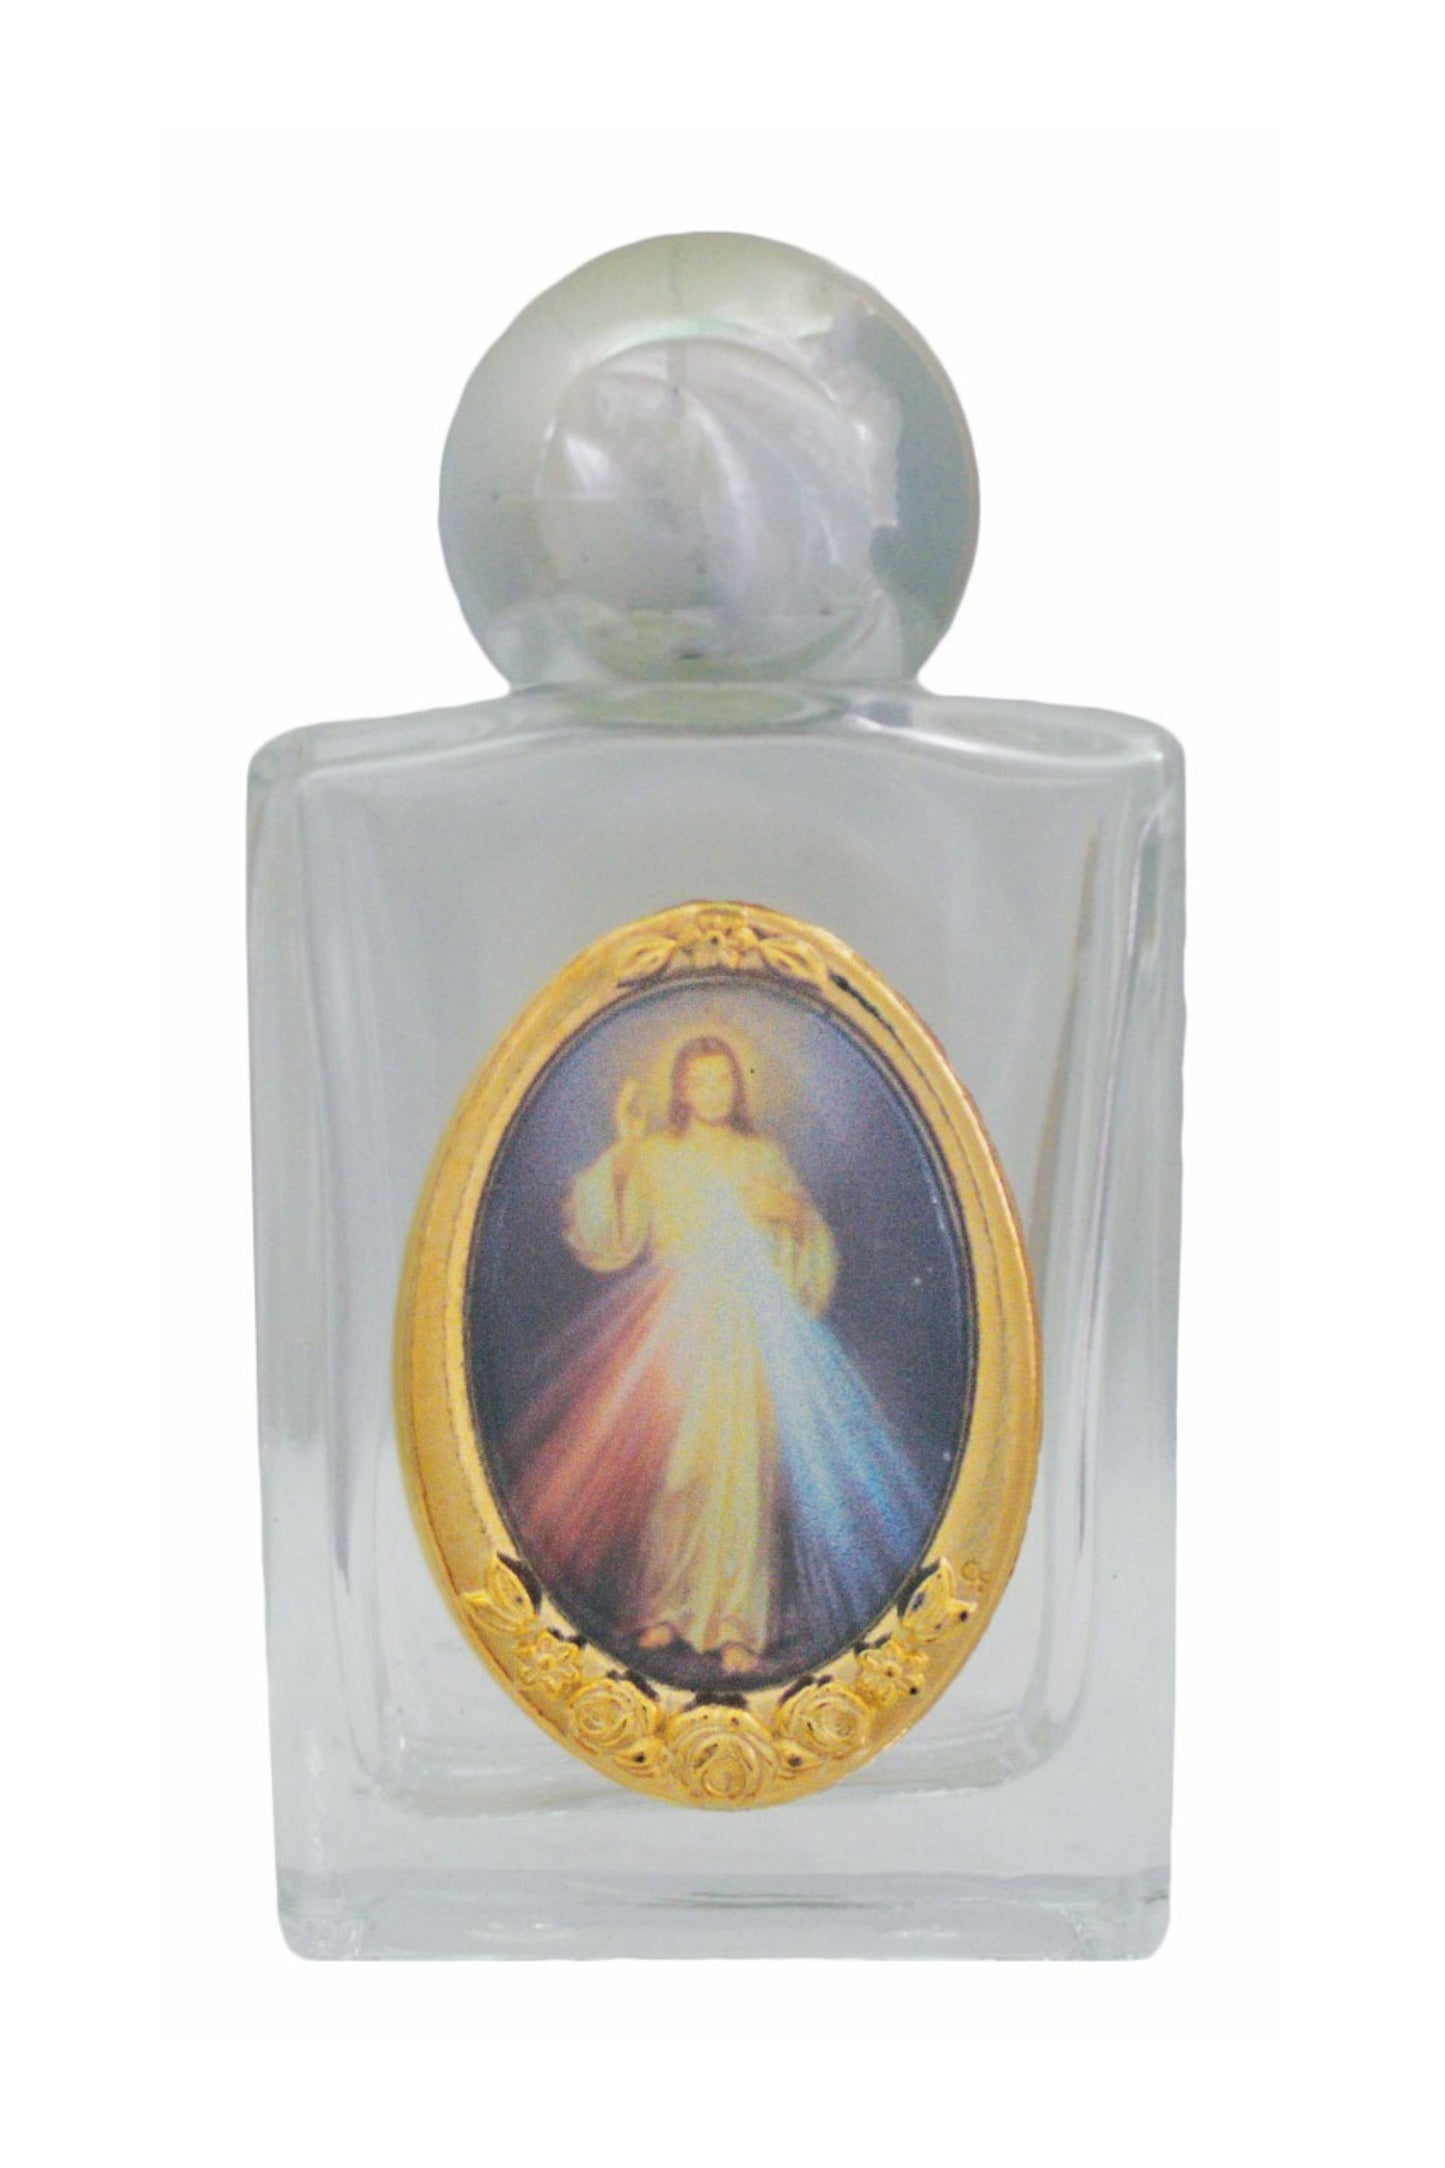 WB11-DM Divine Mercy Holy Water Bottle 1.75x2.25"